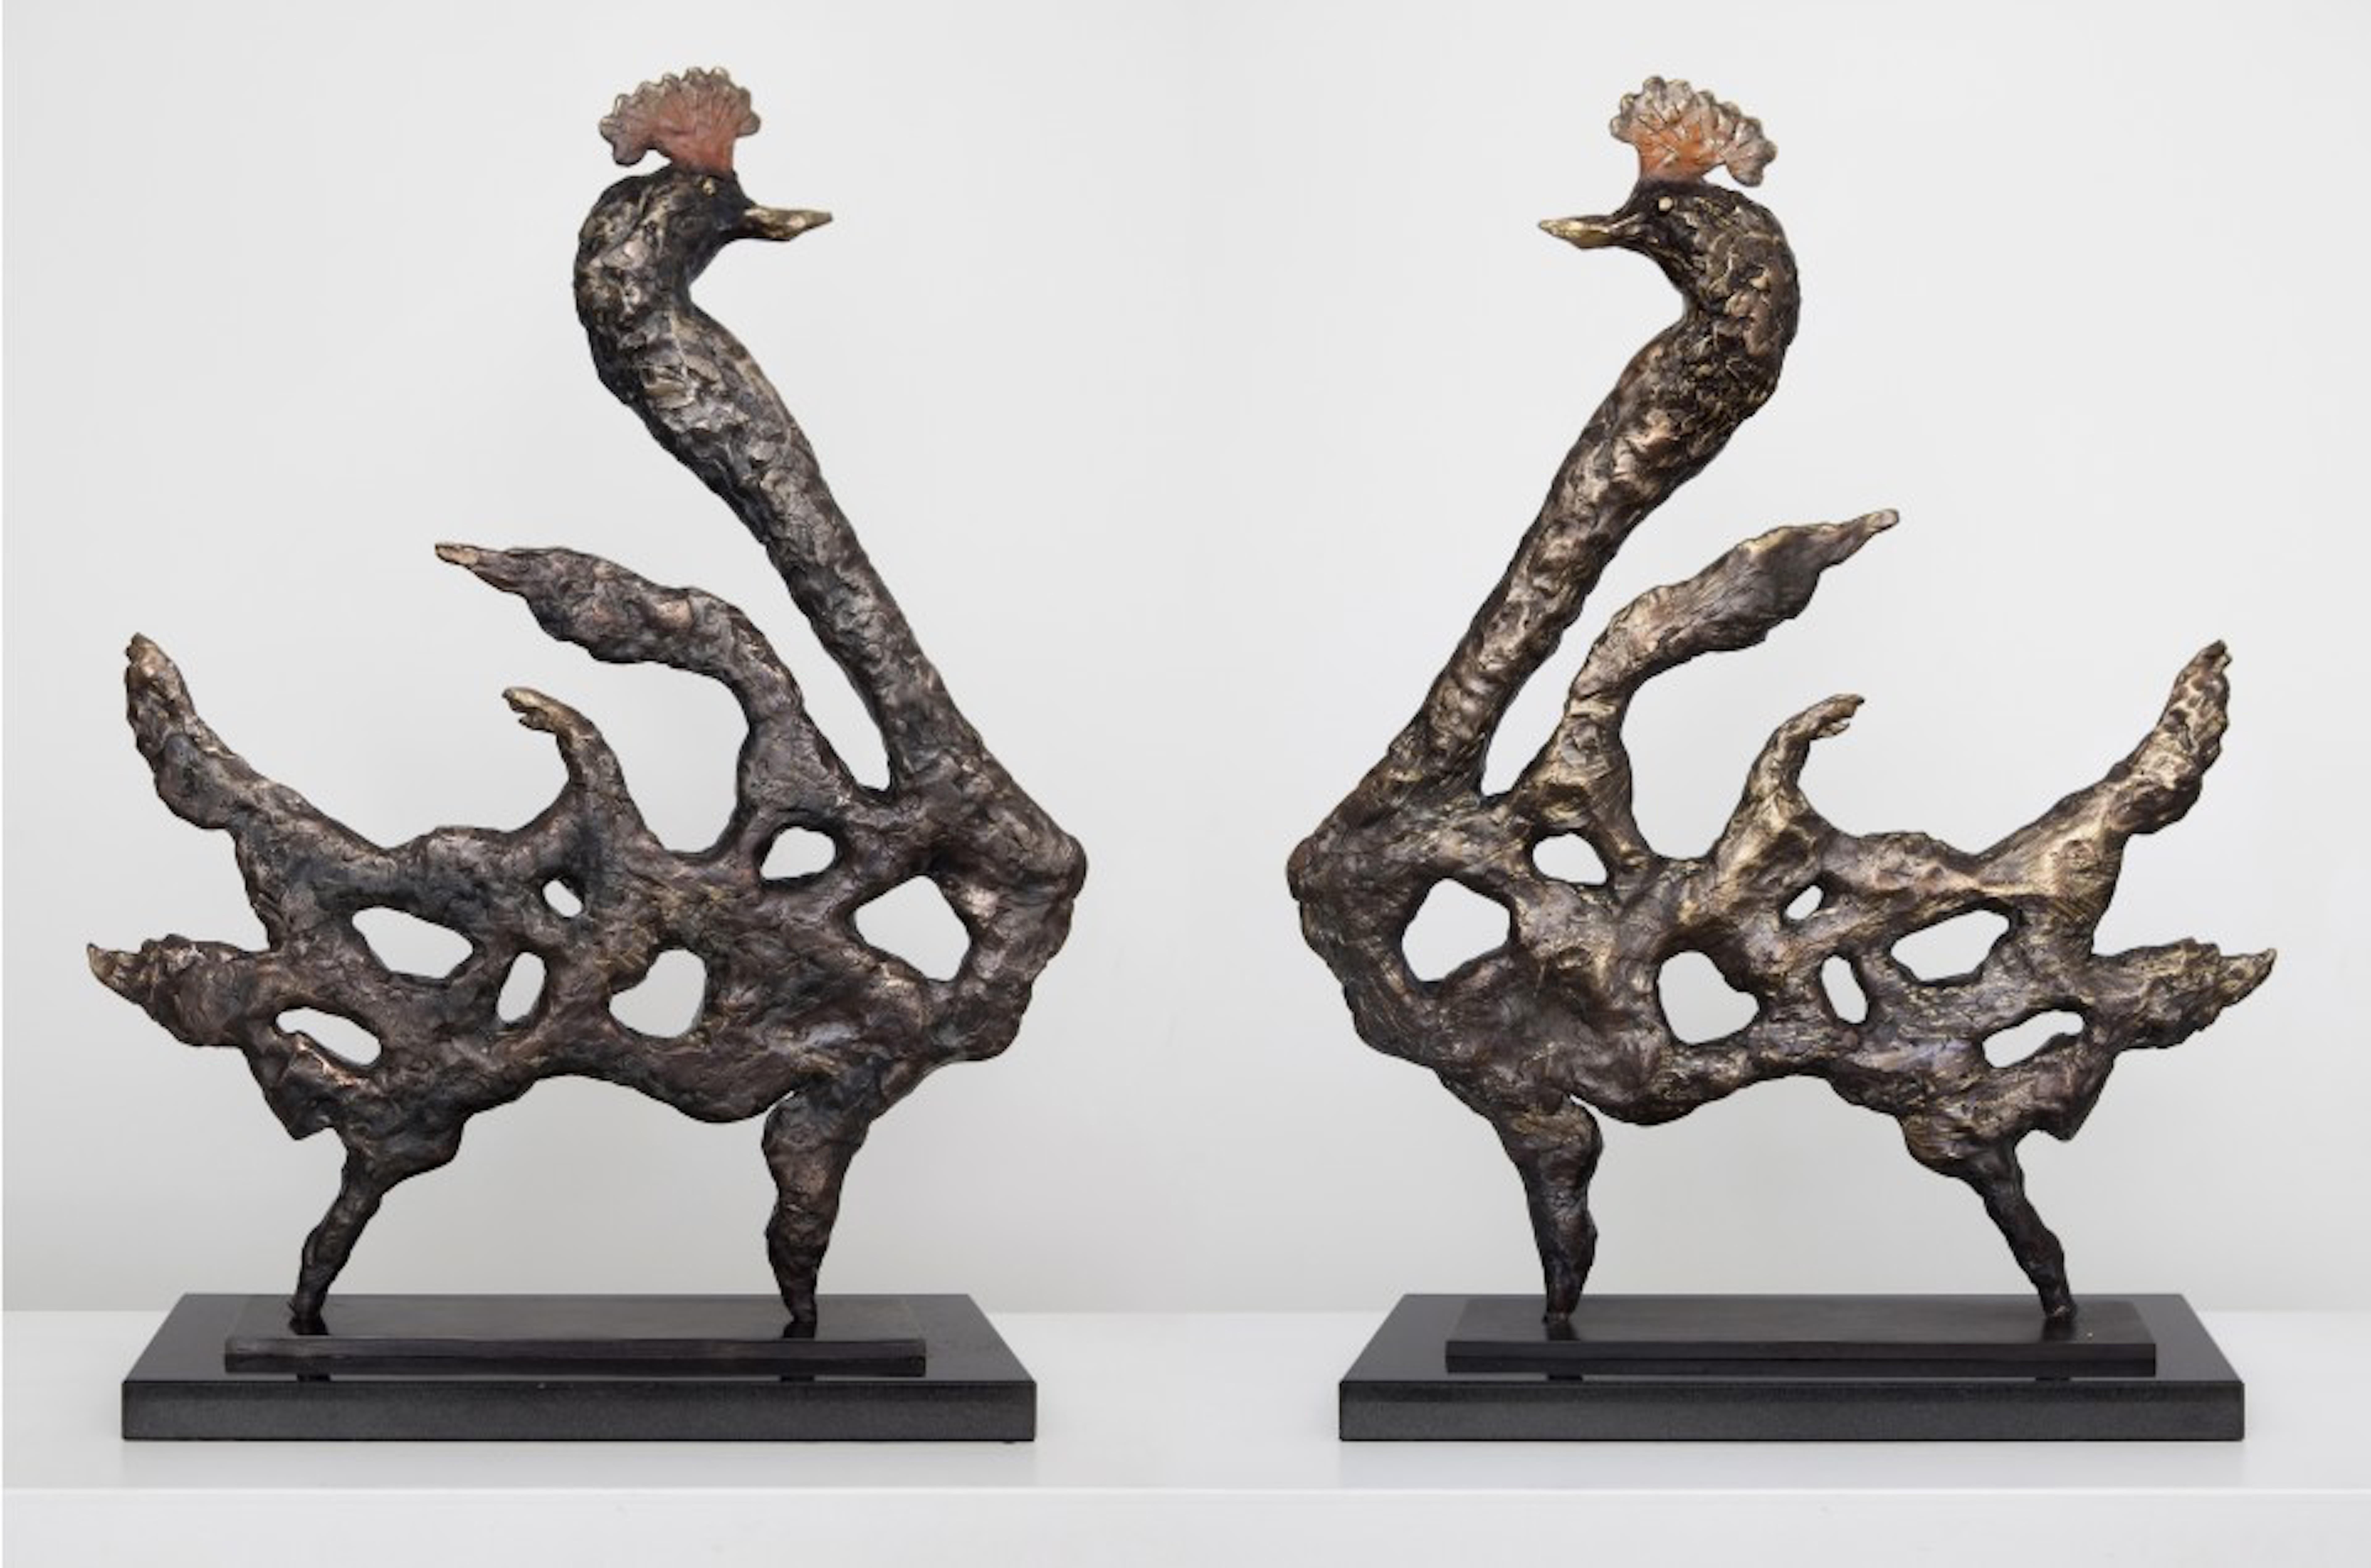 'Royal Birds of India' - One of a kind  pair of  beautiful bronze sculptures, hand crafted moulded and cast in the lost wax process.  Magnificent grand pair of birds  in sculpture form that stand out and create a wow effect . The artwork is loosely